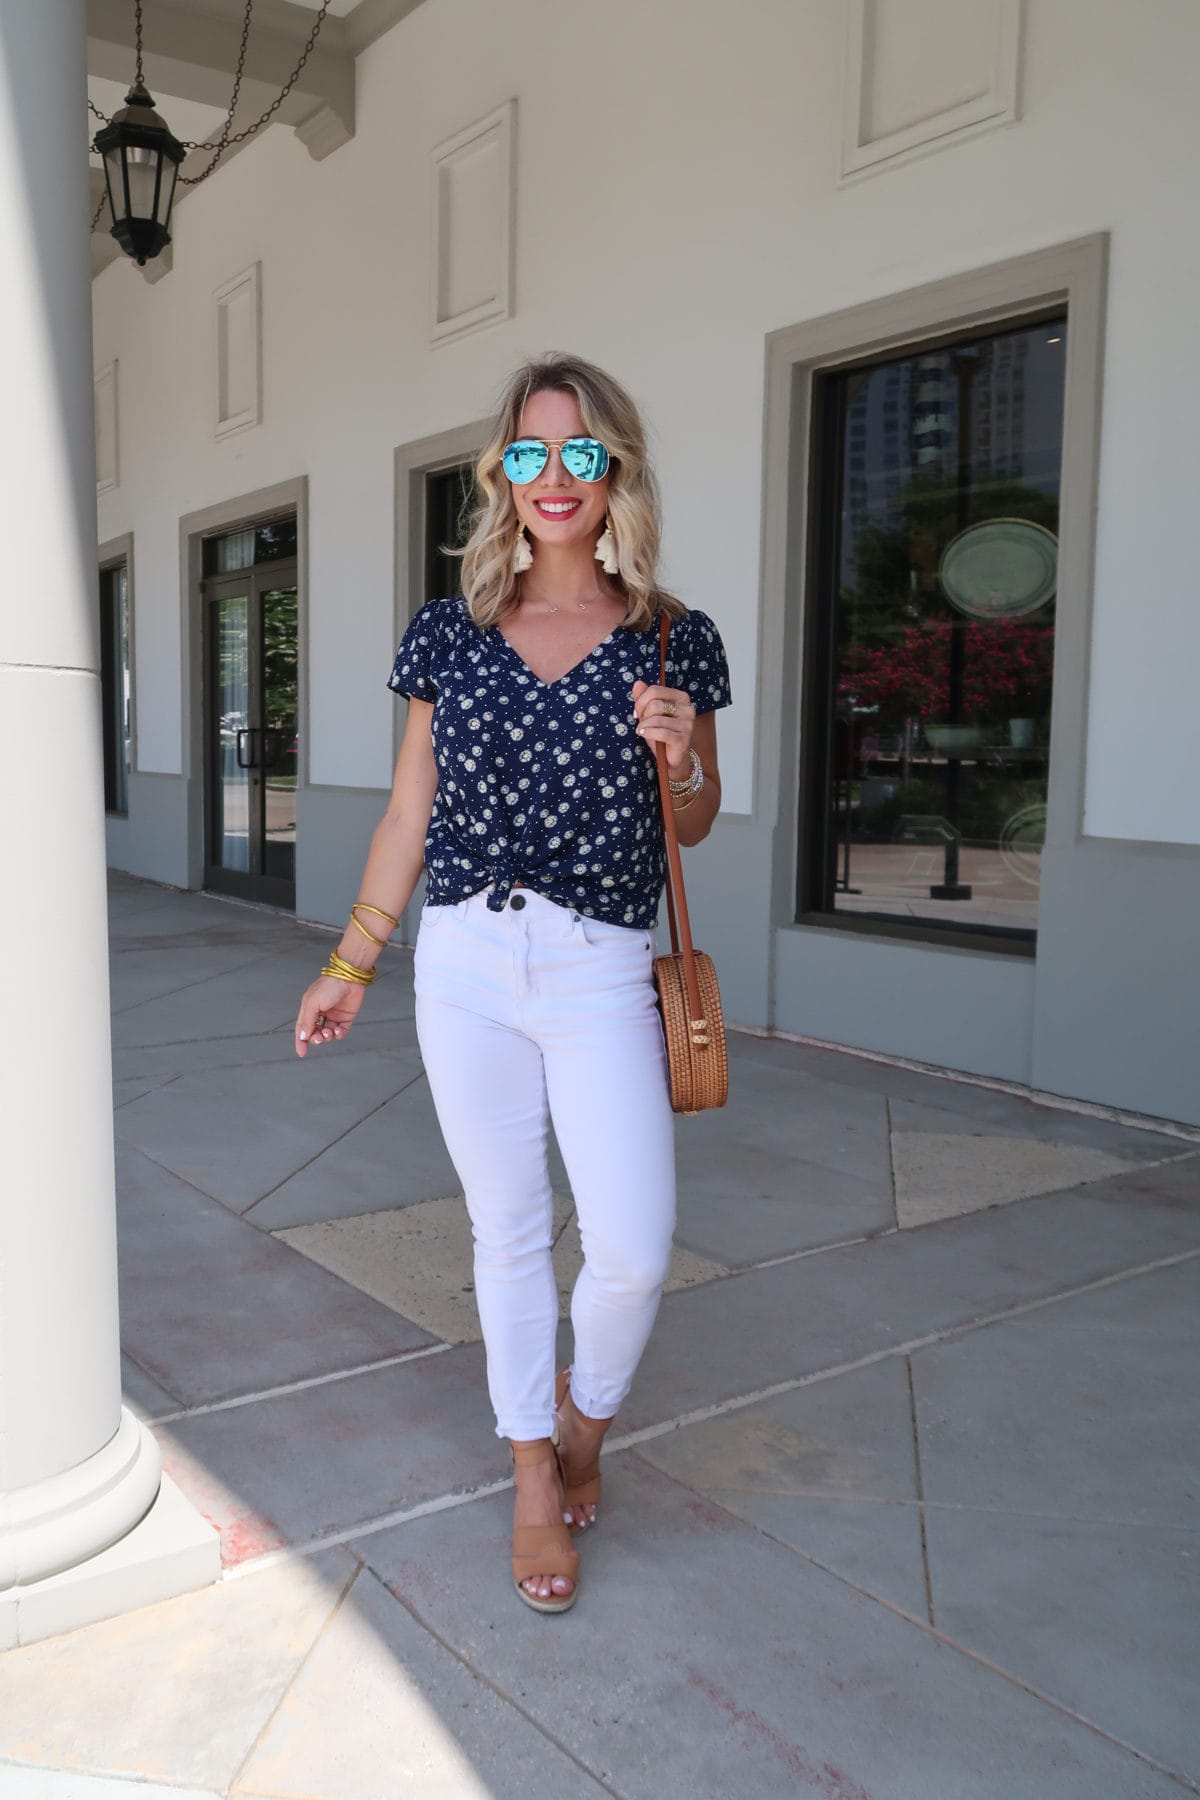 New Summer Styles, Nordstrom and Gibson, Daisy Print Top, Kut from Kloth Jeans, Wedges, Woven Bag, Blue Sunglasses